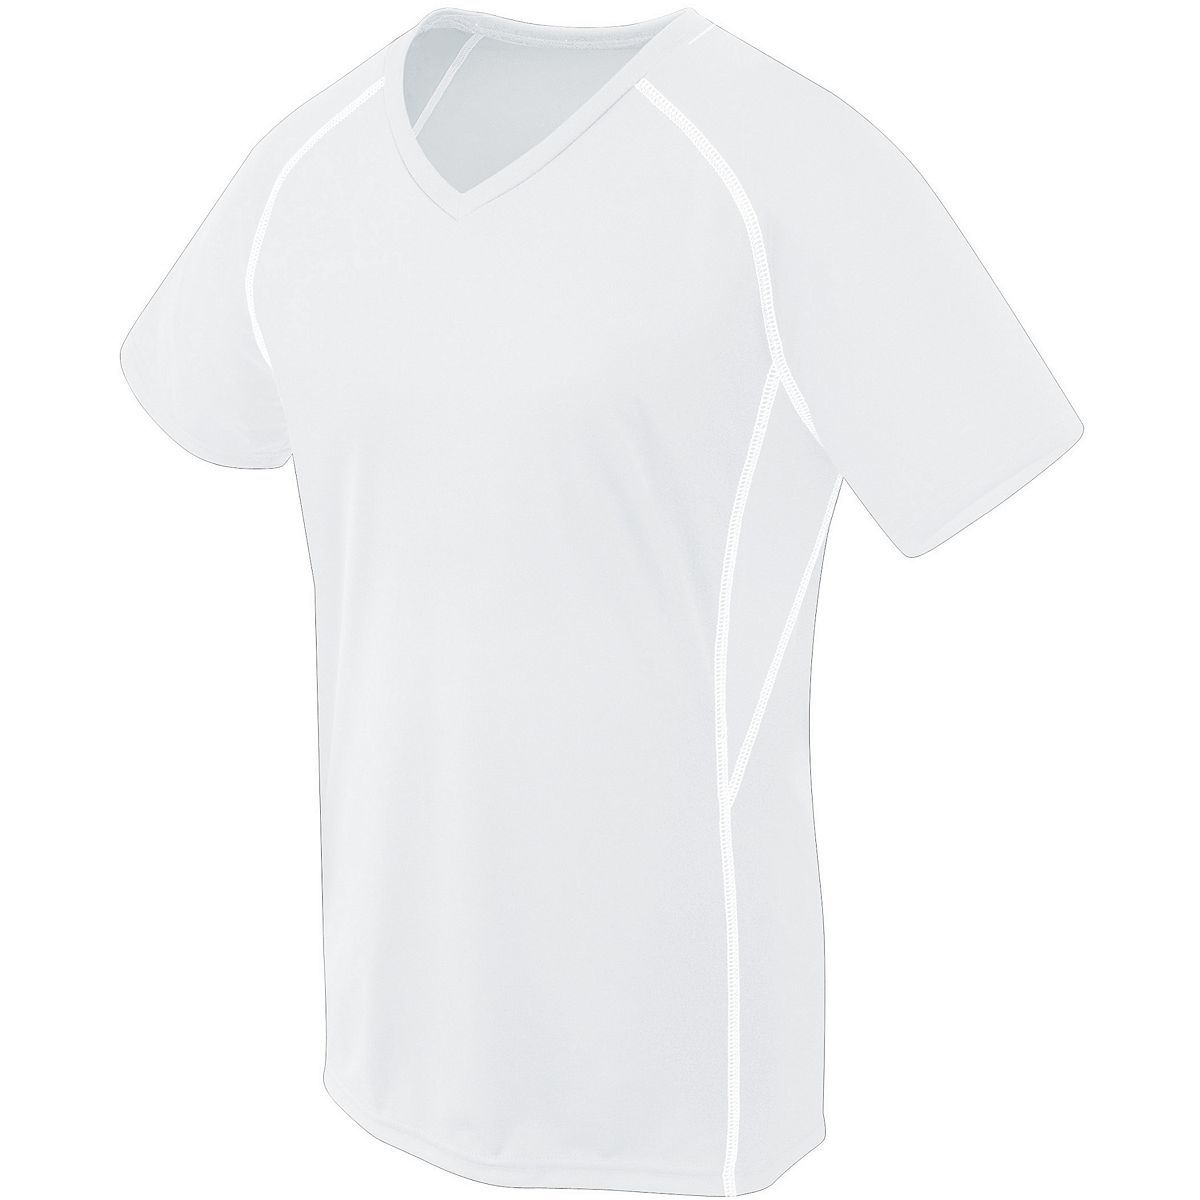 High 5 Ladies Evolution Short Sleeve in White/White/White  -Part of the Ladies, High5-Products, Shirts product lines at KanaleyCreations.com